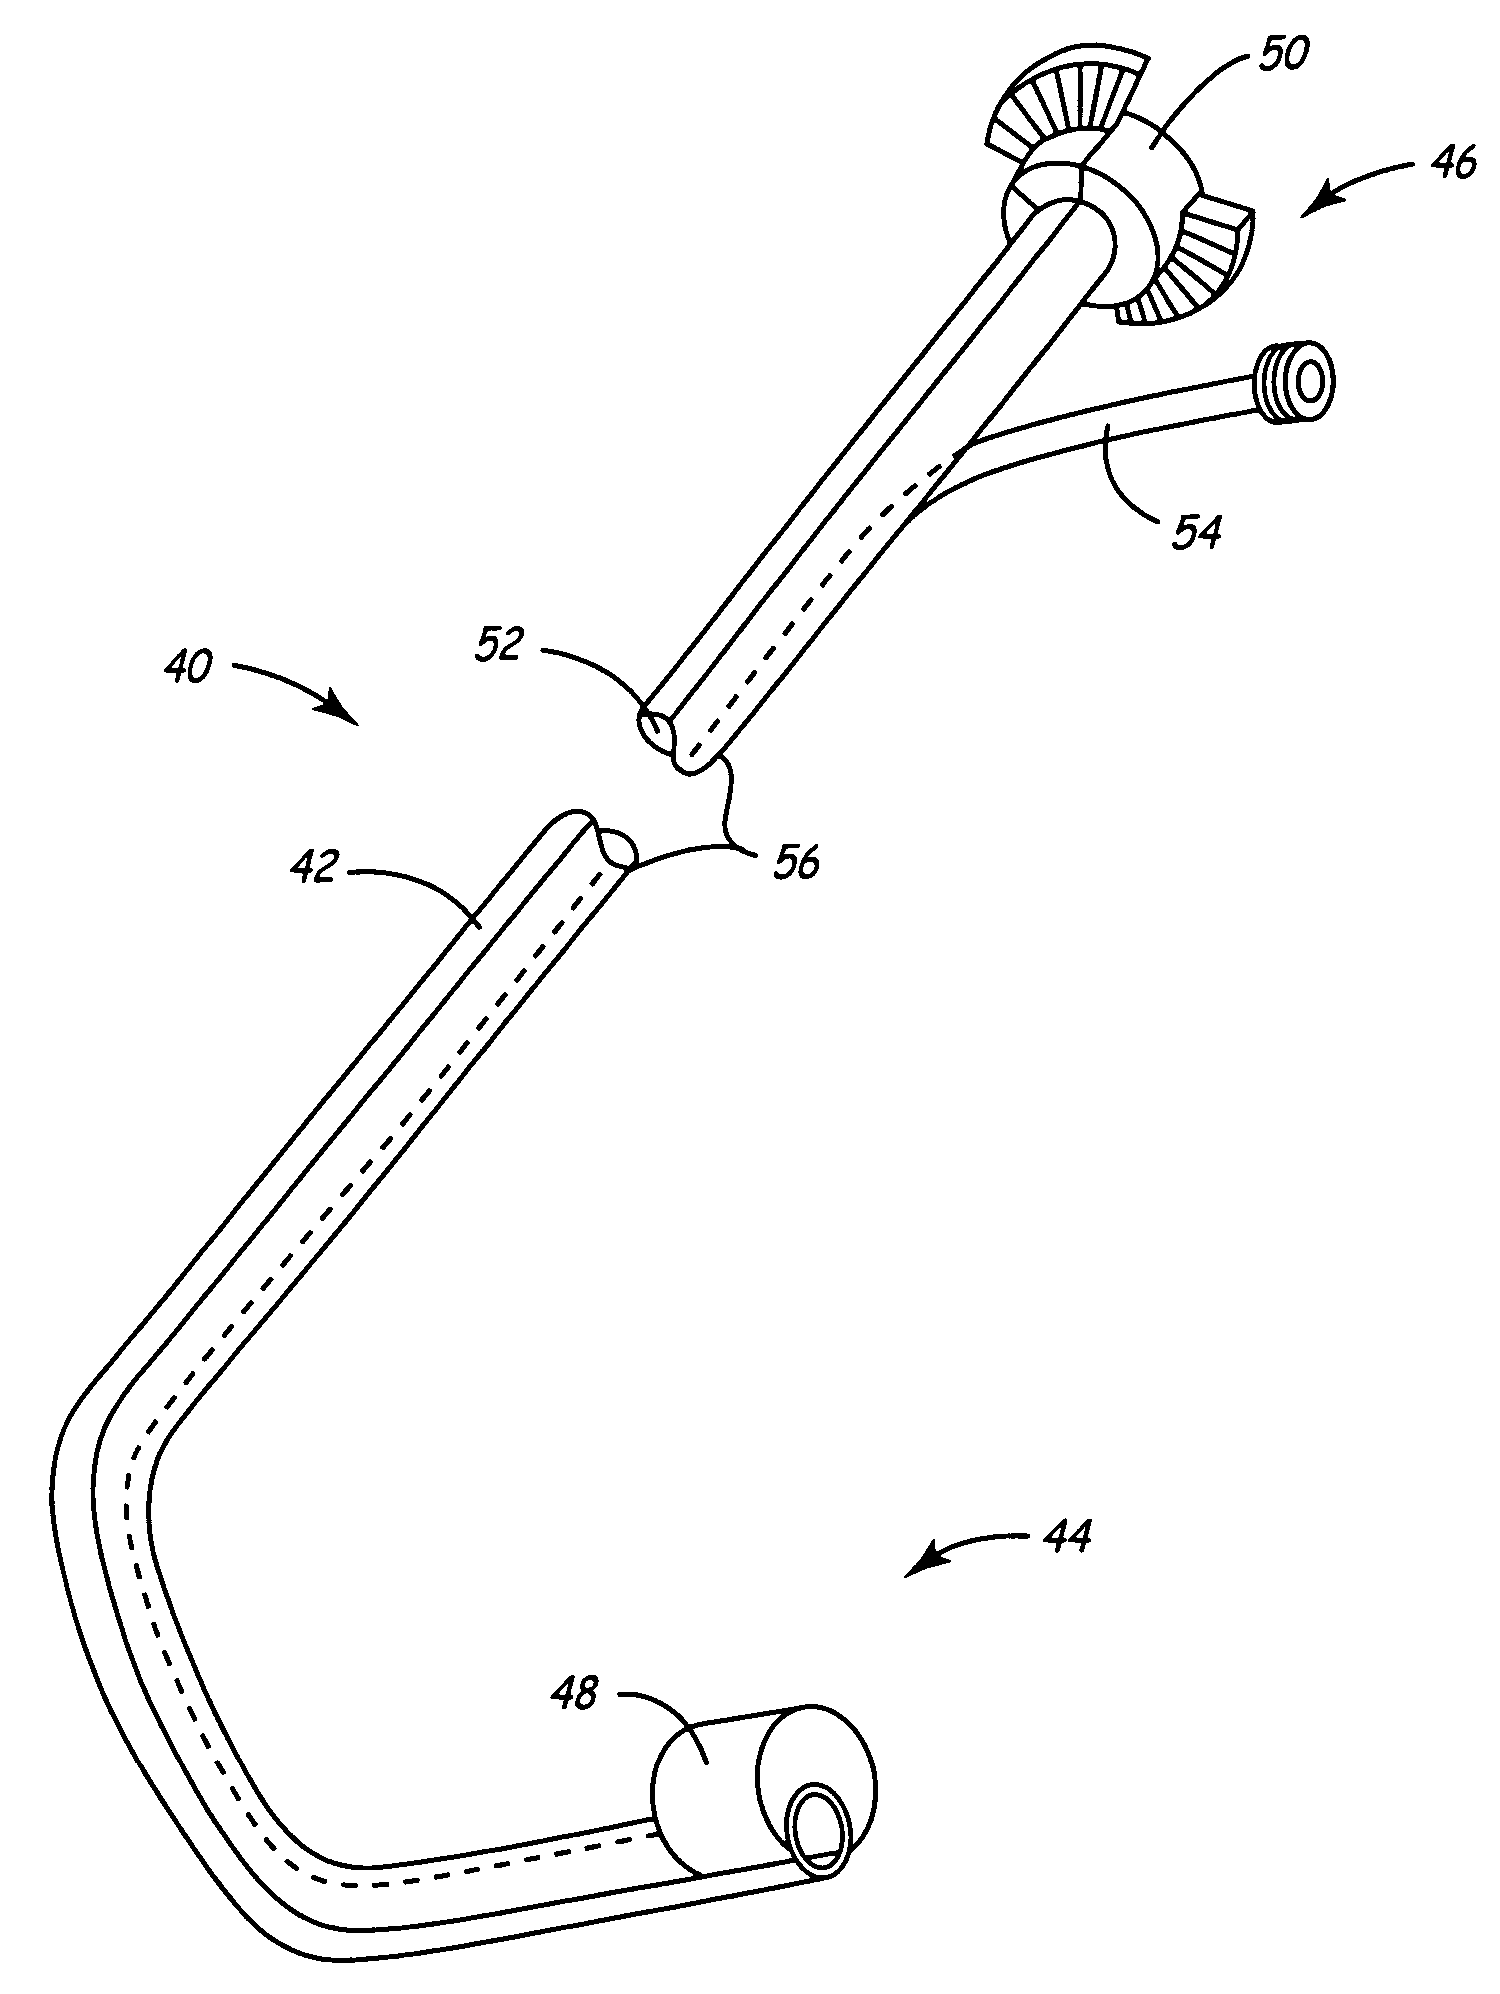 Method and apparatus for endovenous pacing lead